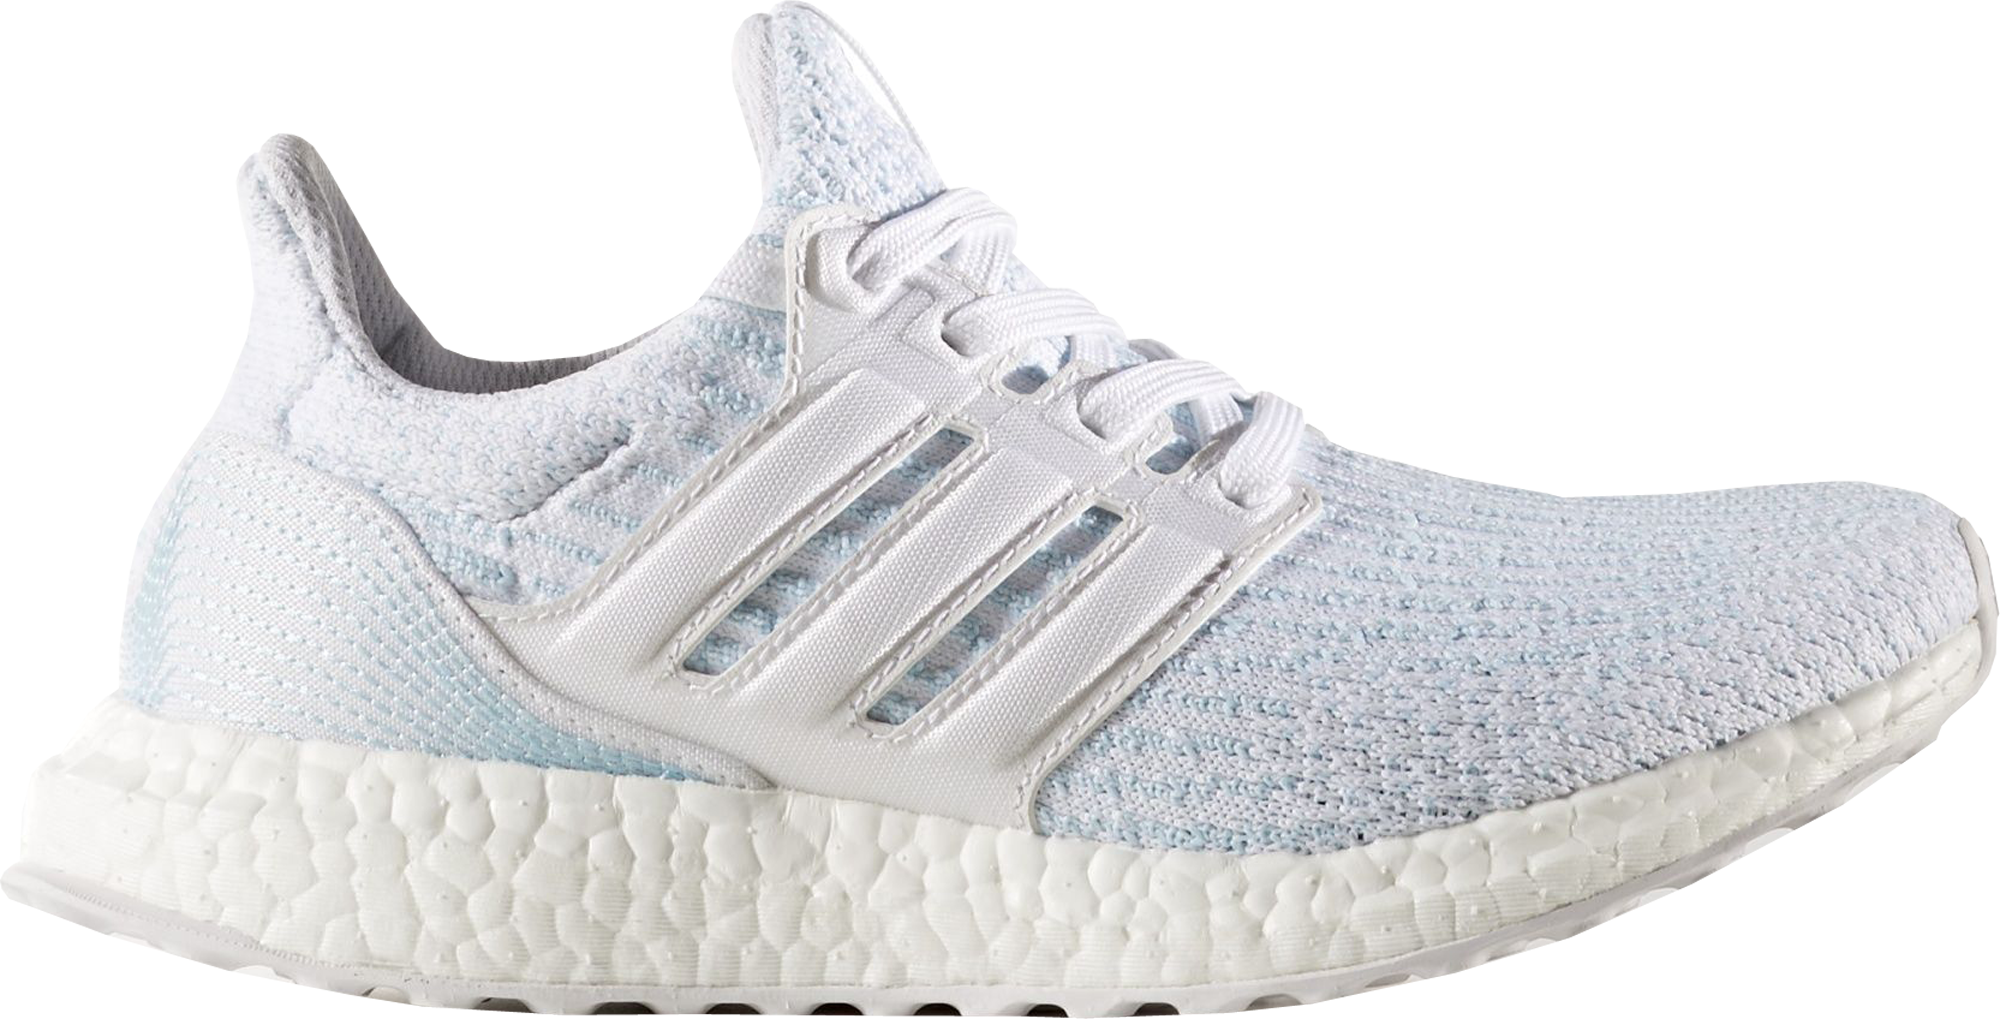 parley ultra boost 3.0